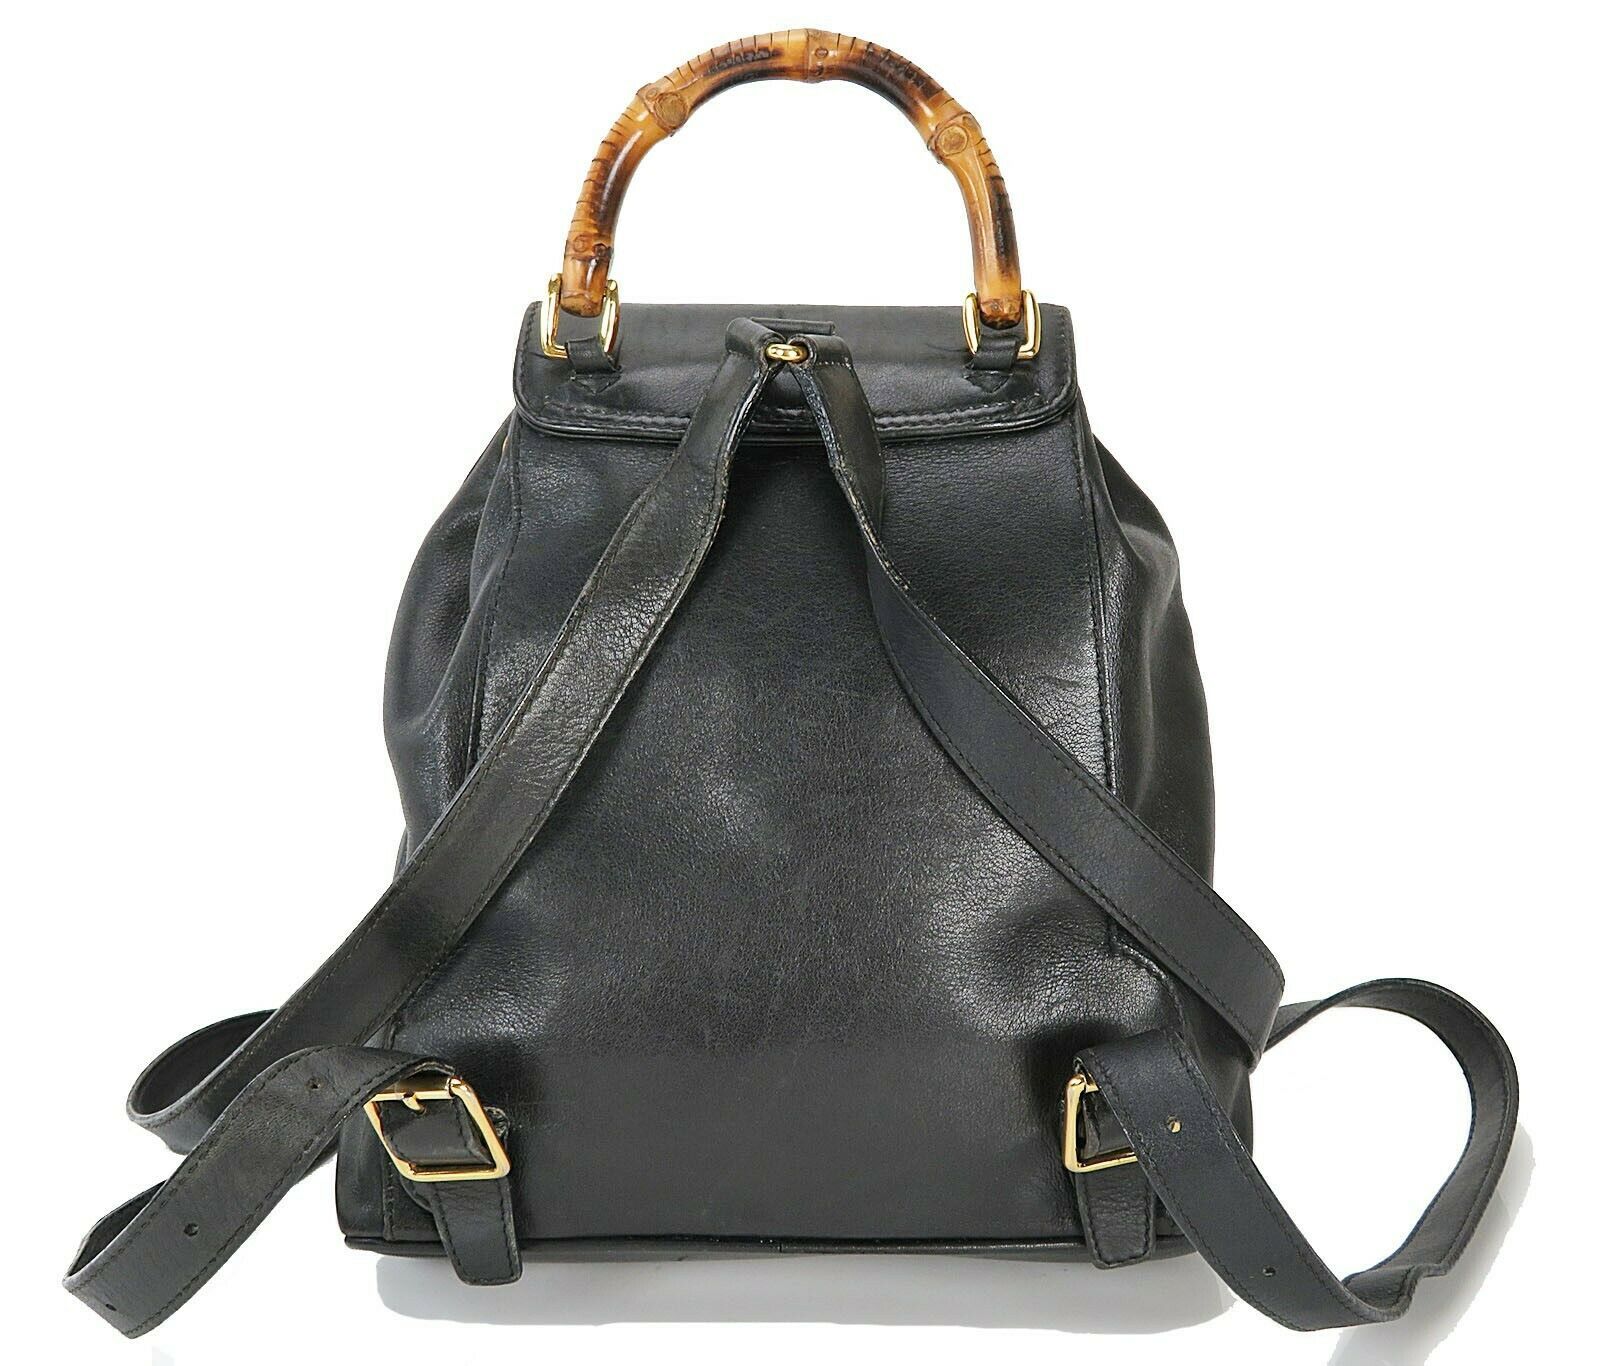 Authentic GUCCI Black Leather Bamboo Handle Mini Backpack Bag #34307 - Women&#39;s Bags & Handbags